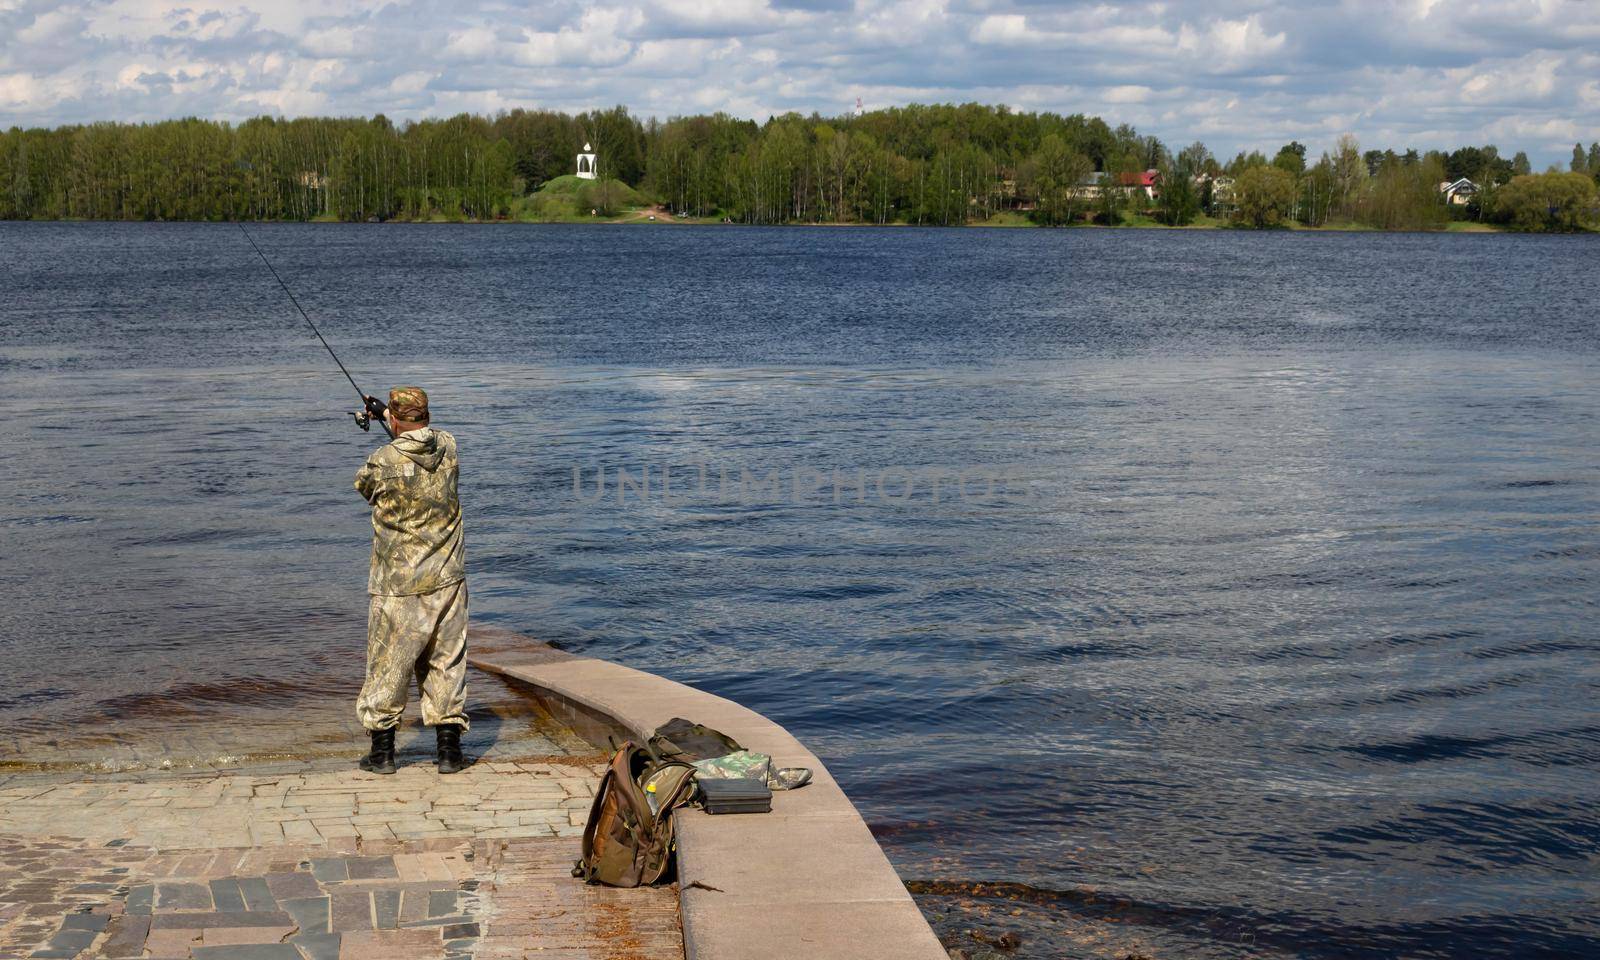 A fisherman in camouflage catches fish in the spring river.